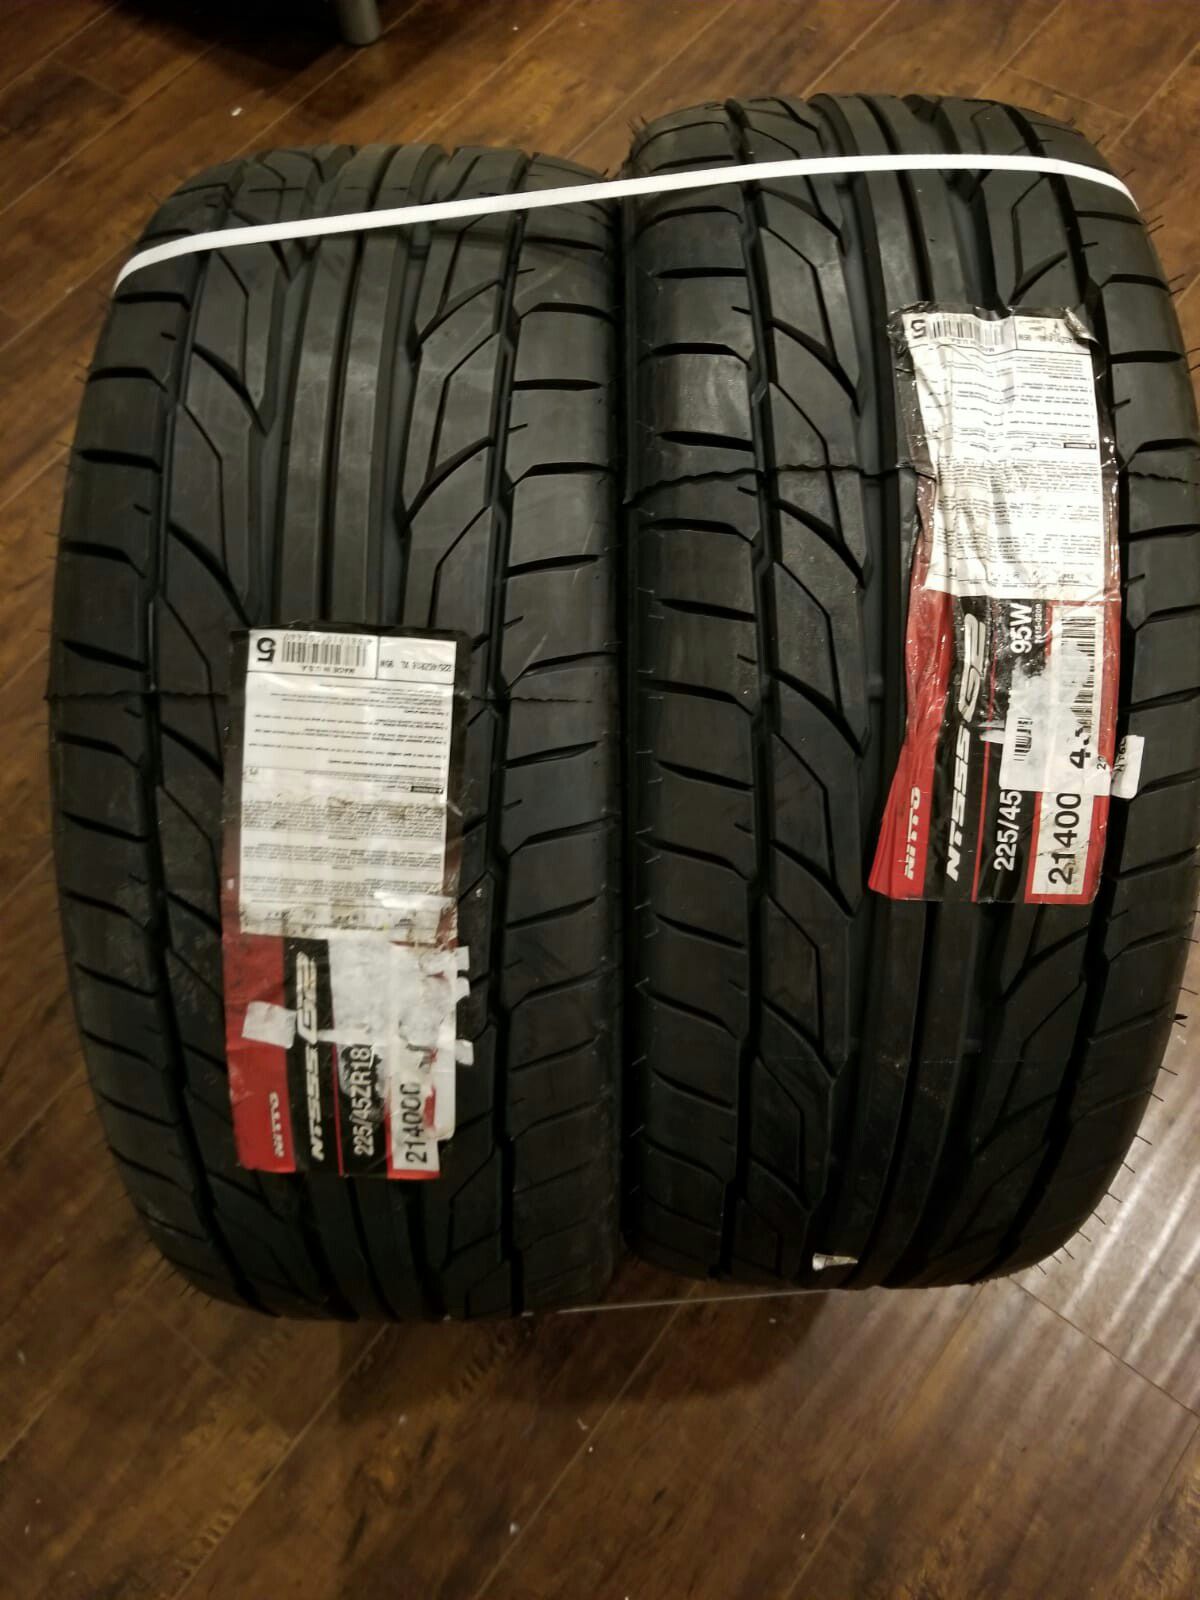 New Nitto Extreme tires 225/45/18